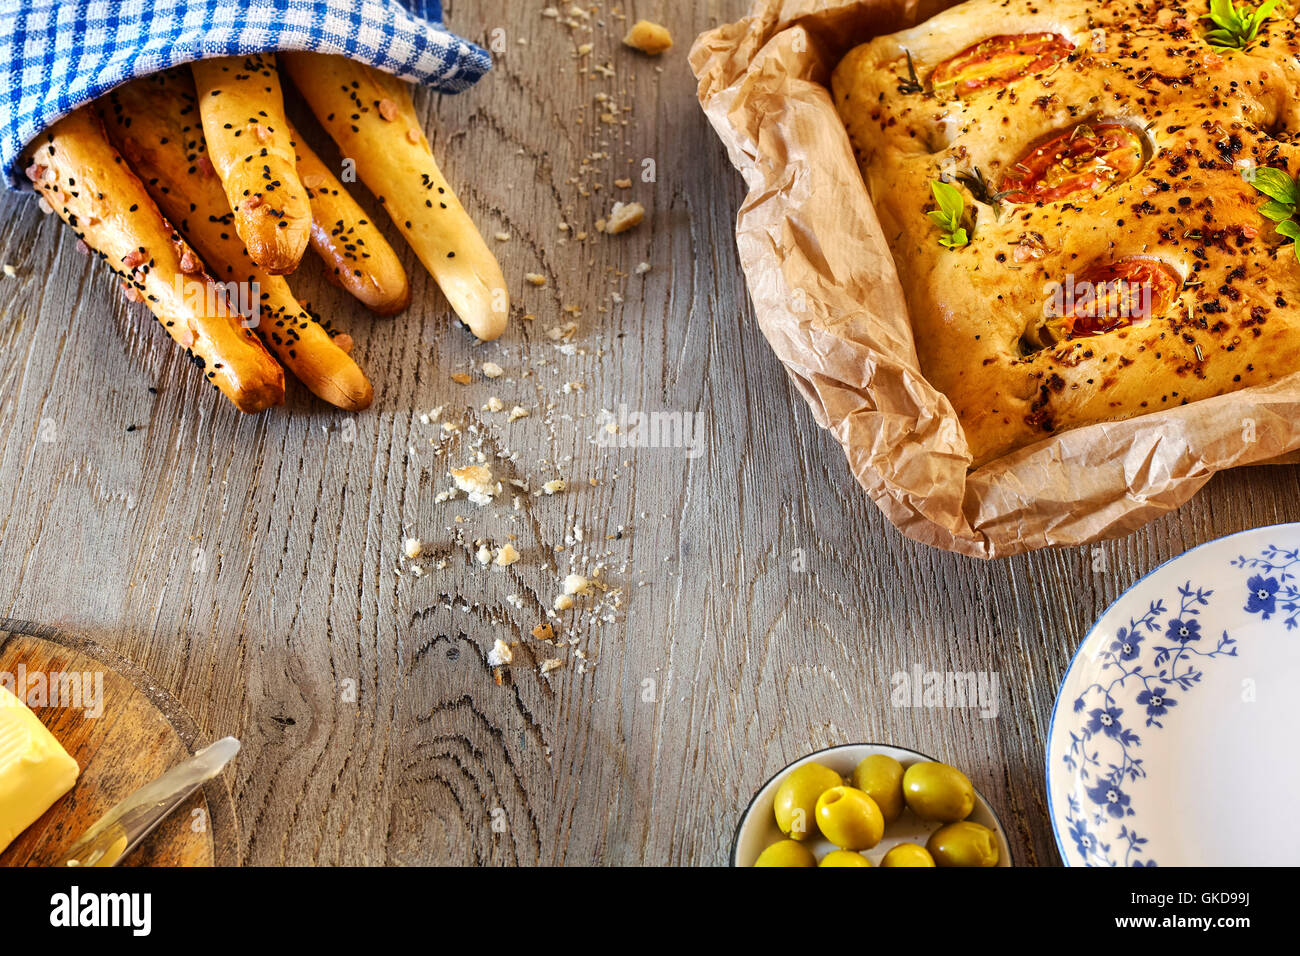 Traditional focaccia and bread sticks, rustic setting on a wooden table from above. Stock Photo